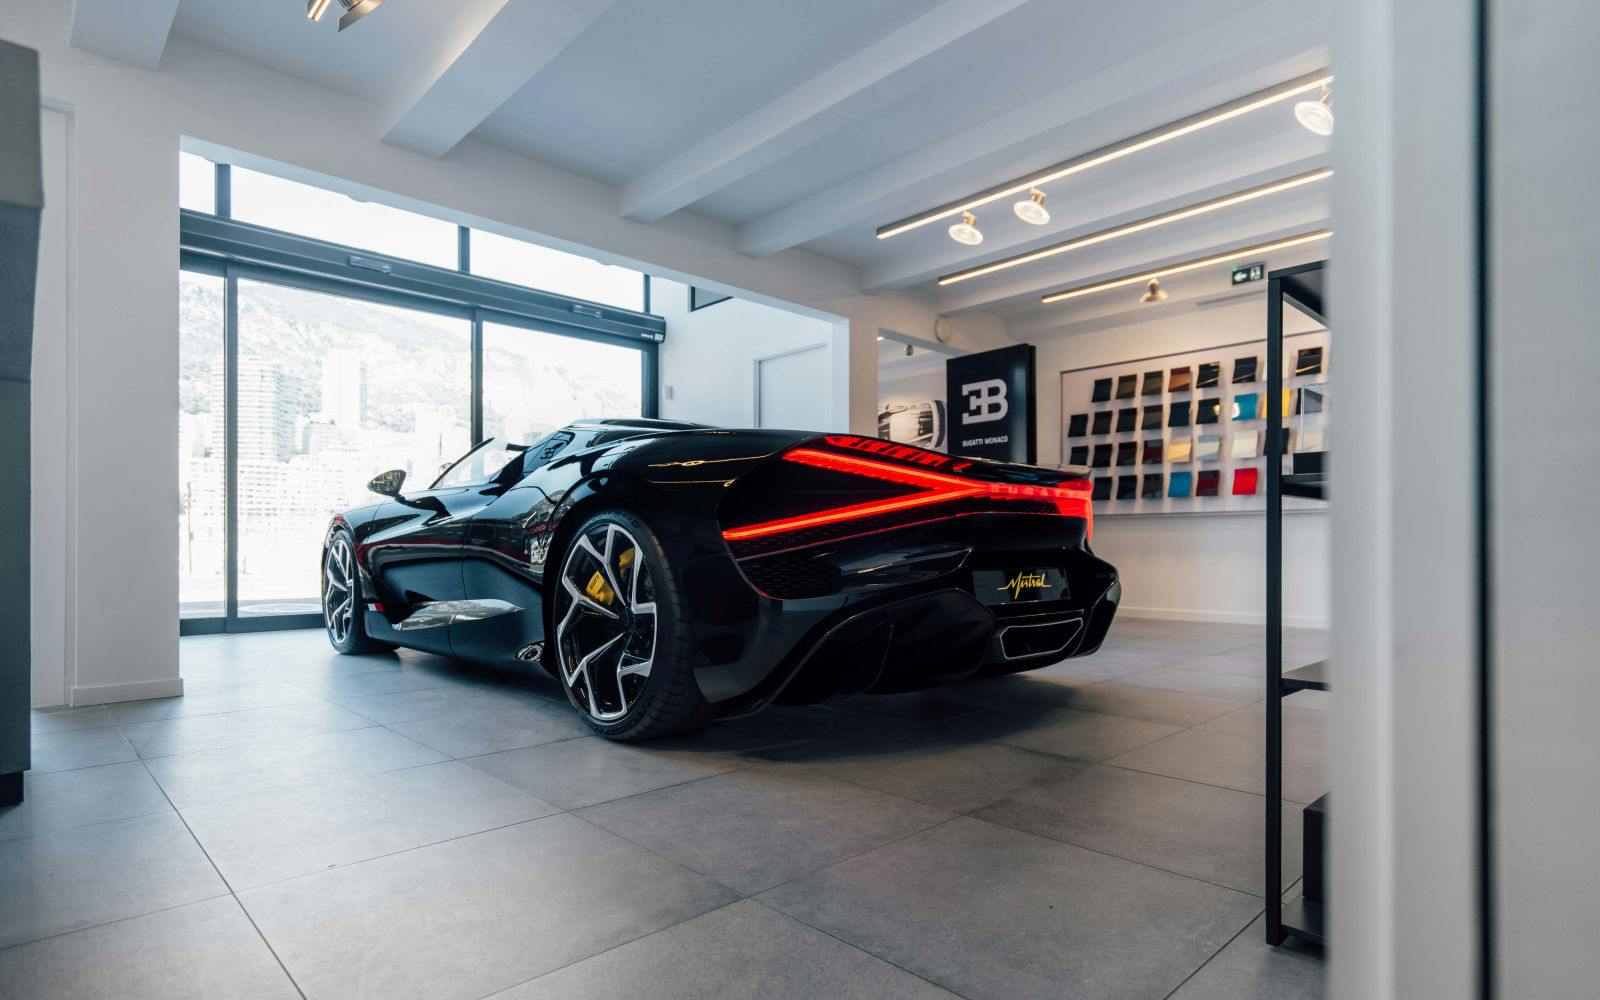 The Bugatti Monaco showroom was created in partnership with the Segond Automobiles Group, which has been operating in the Principality of Monaco for over 35 years.